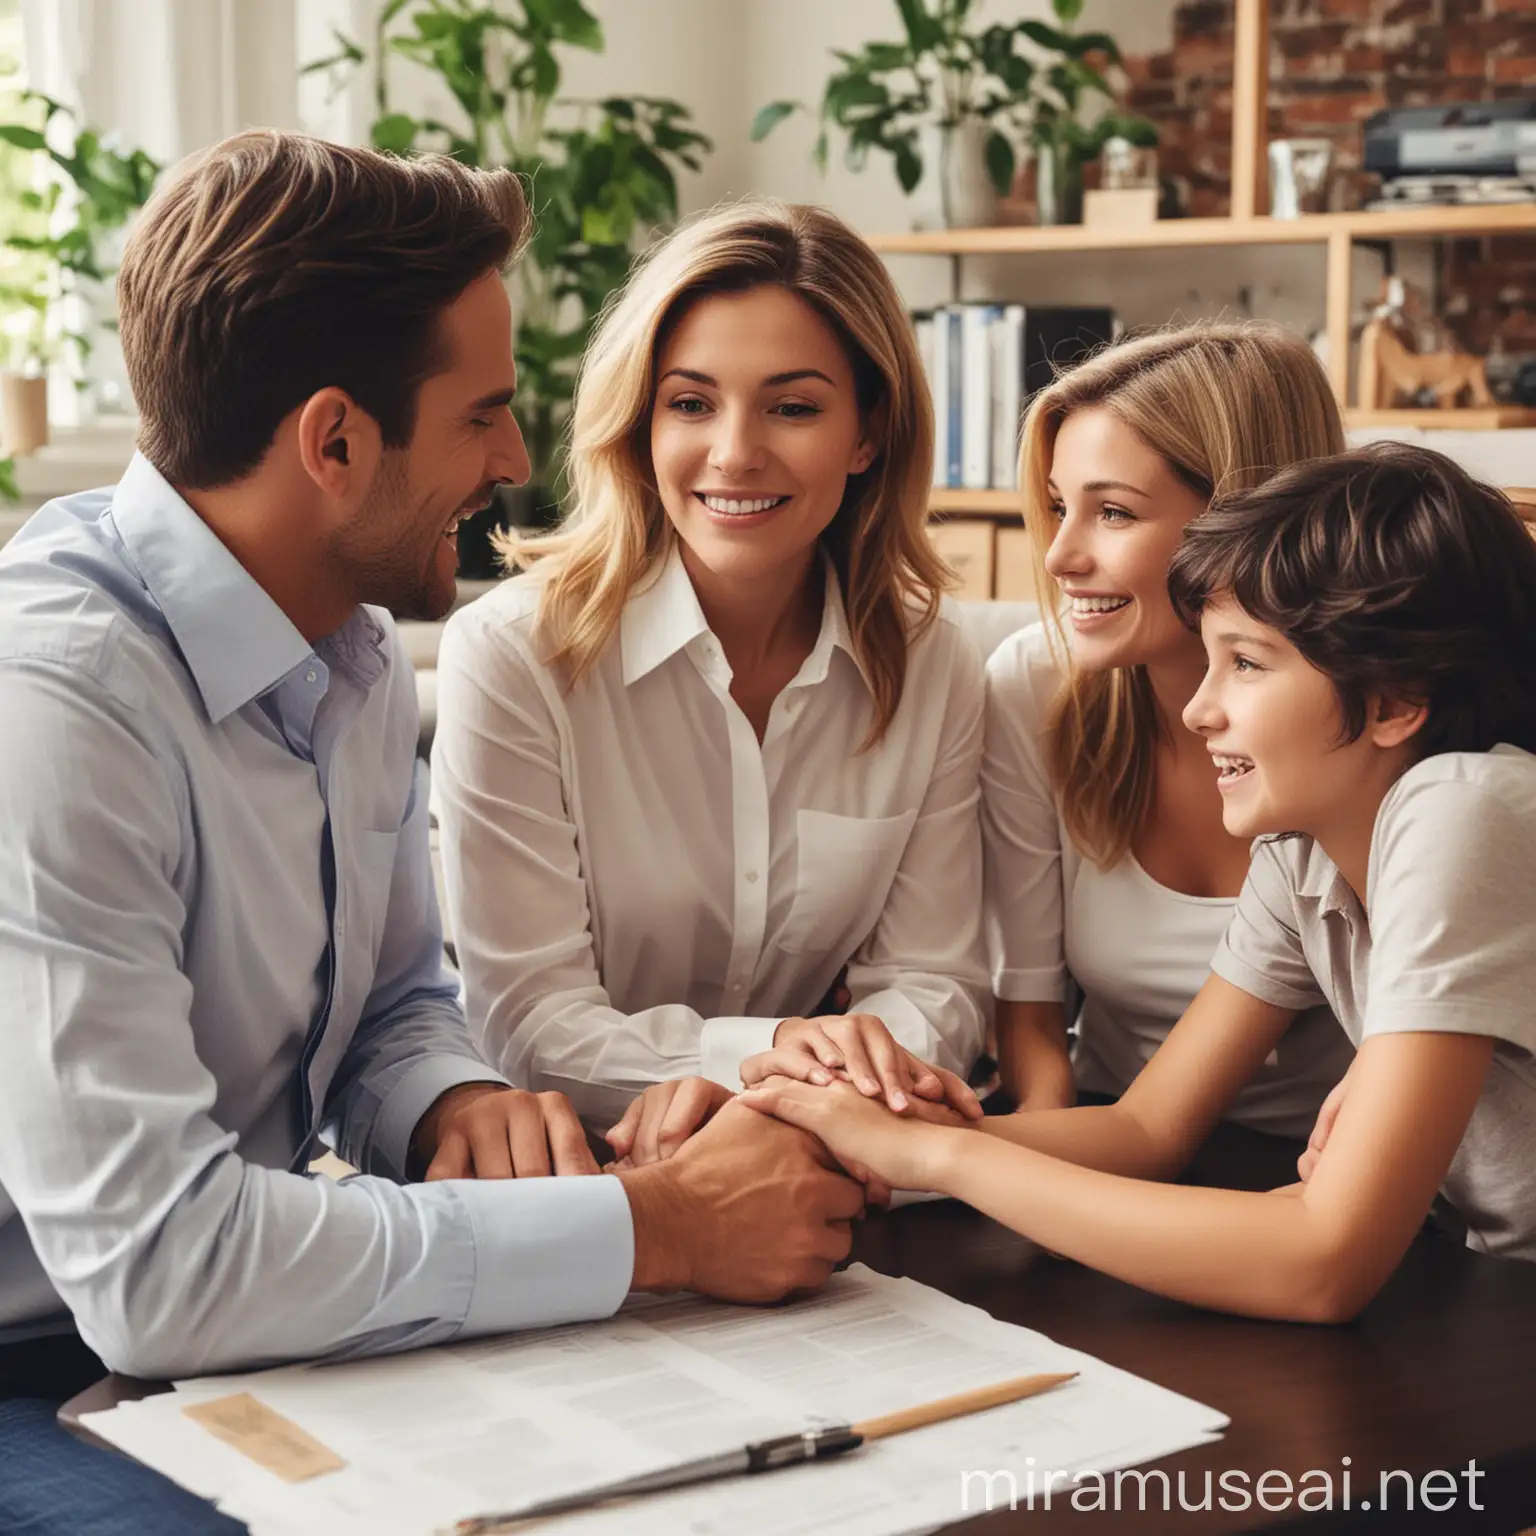 The Role of Family Communication in a Family Business. Purpose:
- Exchange Info & Build Relationships
- Balance Autonomy & Intimacy
- Nurturing: Social, Emotional, Intellectual Development
- Controlling: Positive Moral Development
- Roles Dictate Behavior
- Systems Maximize Family Goals
- Rules Govern Communication
